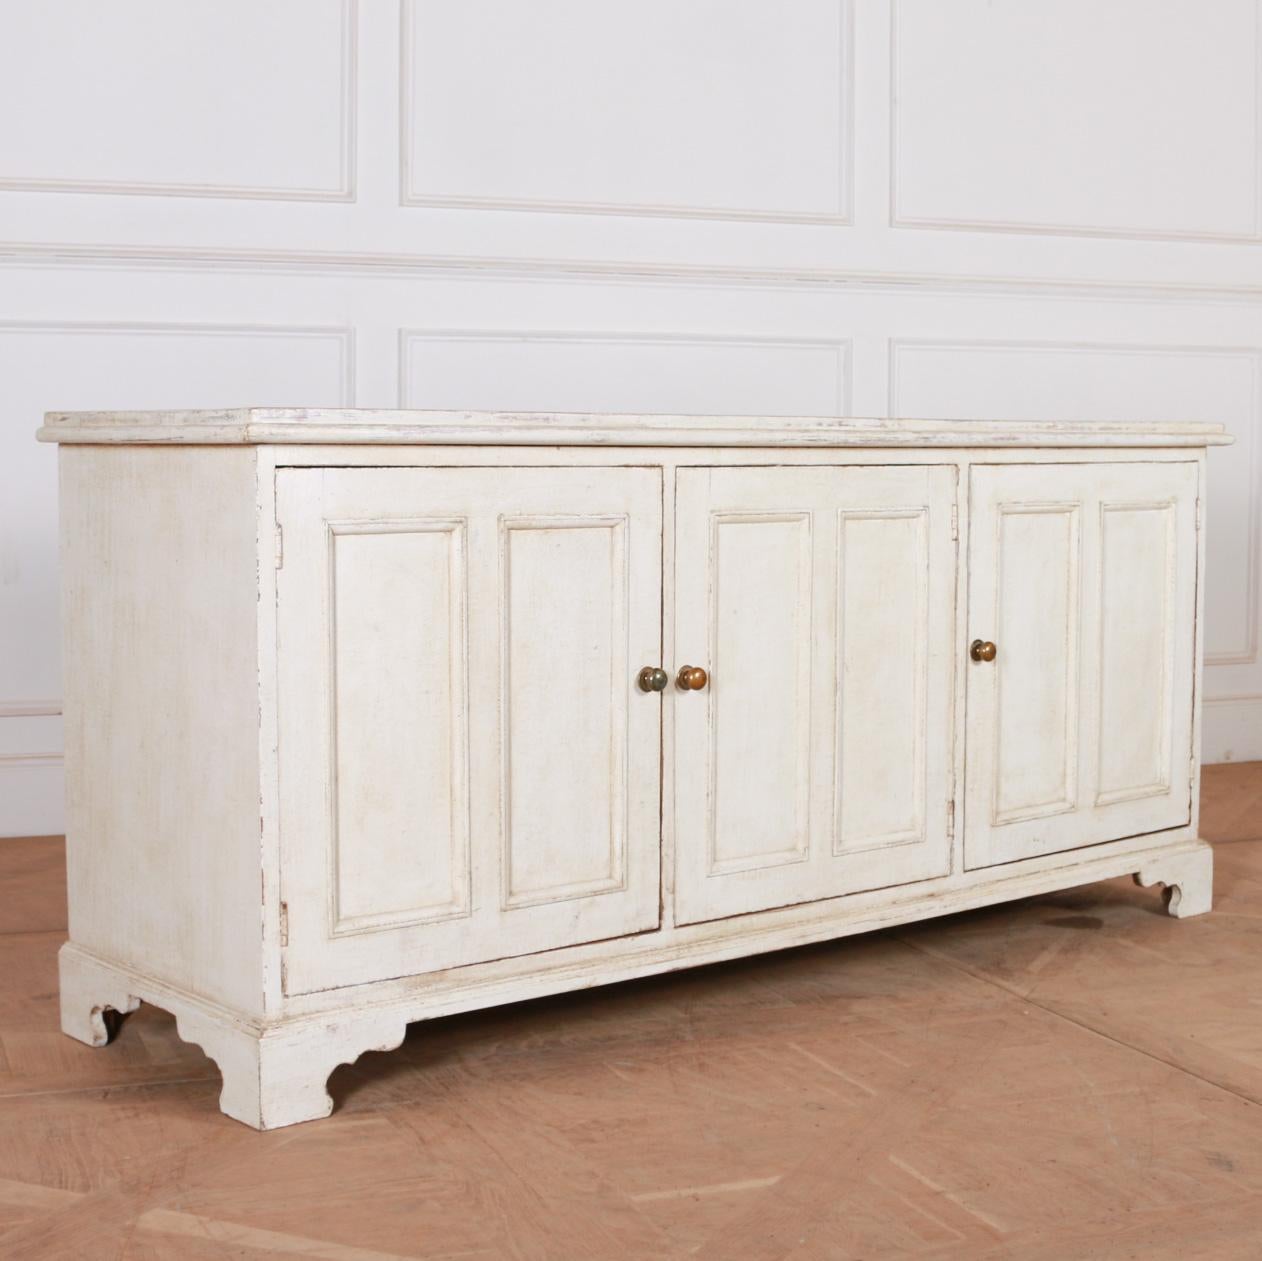 Custom build English style painted pine dresser base.

Reference: 7728

Dimensions
75 inches (191 cms) Wide
22.5 inches (57 cms) Deep
33 inches (84 cms) High